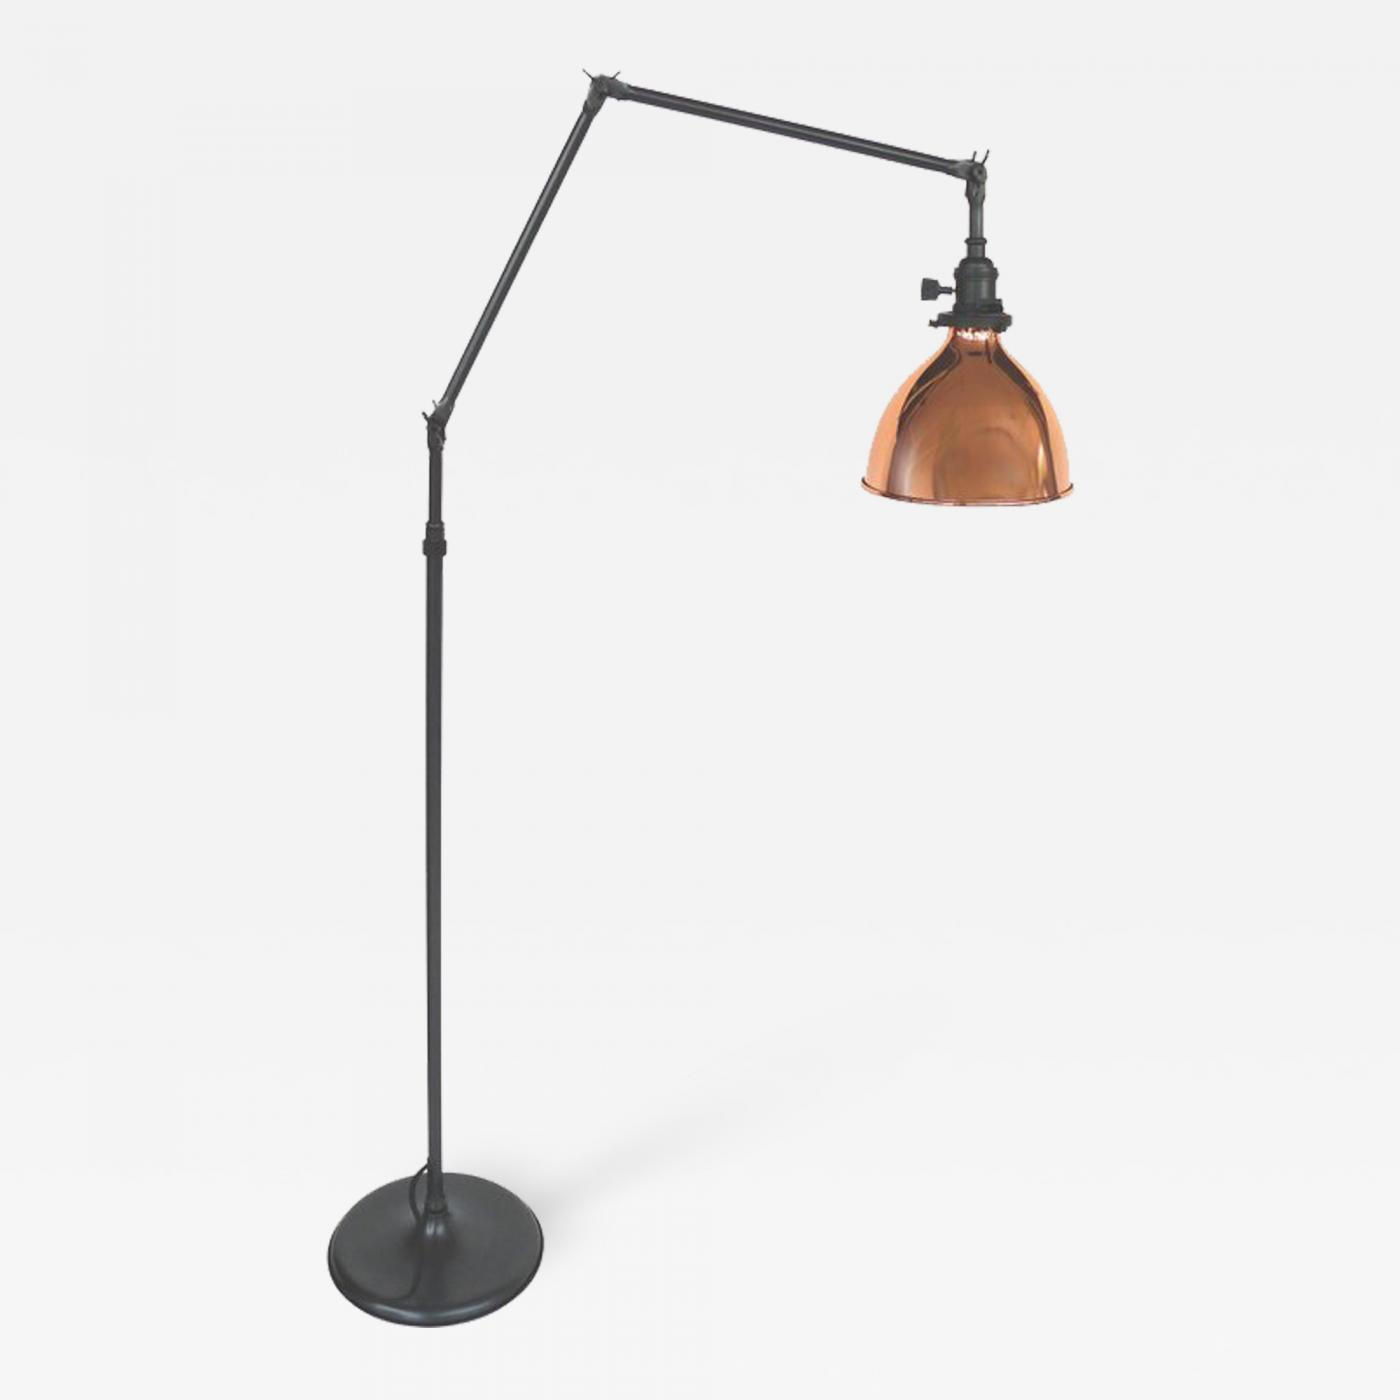 Industrial Style Bronze Adjustable Floor Lamp With Copper Shade regarding sizing 1400 X 1400